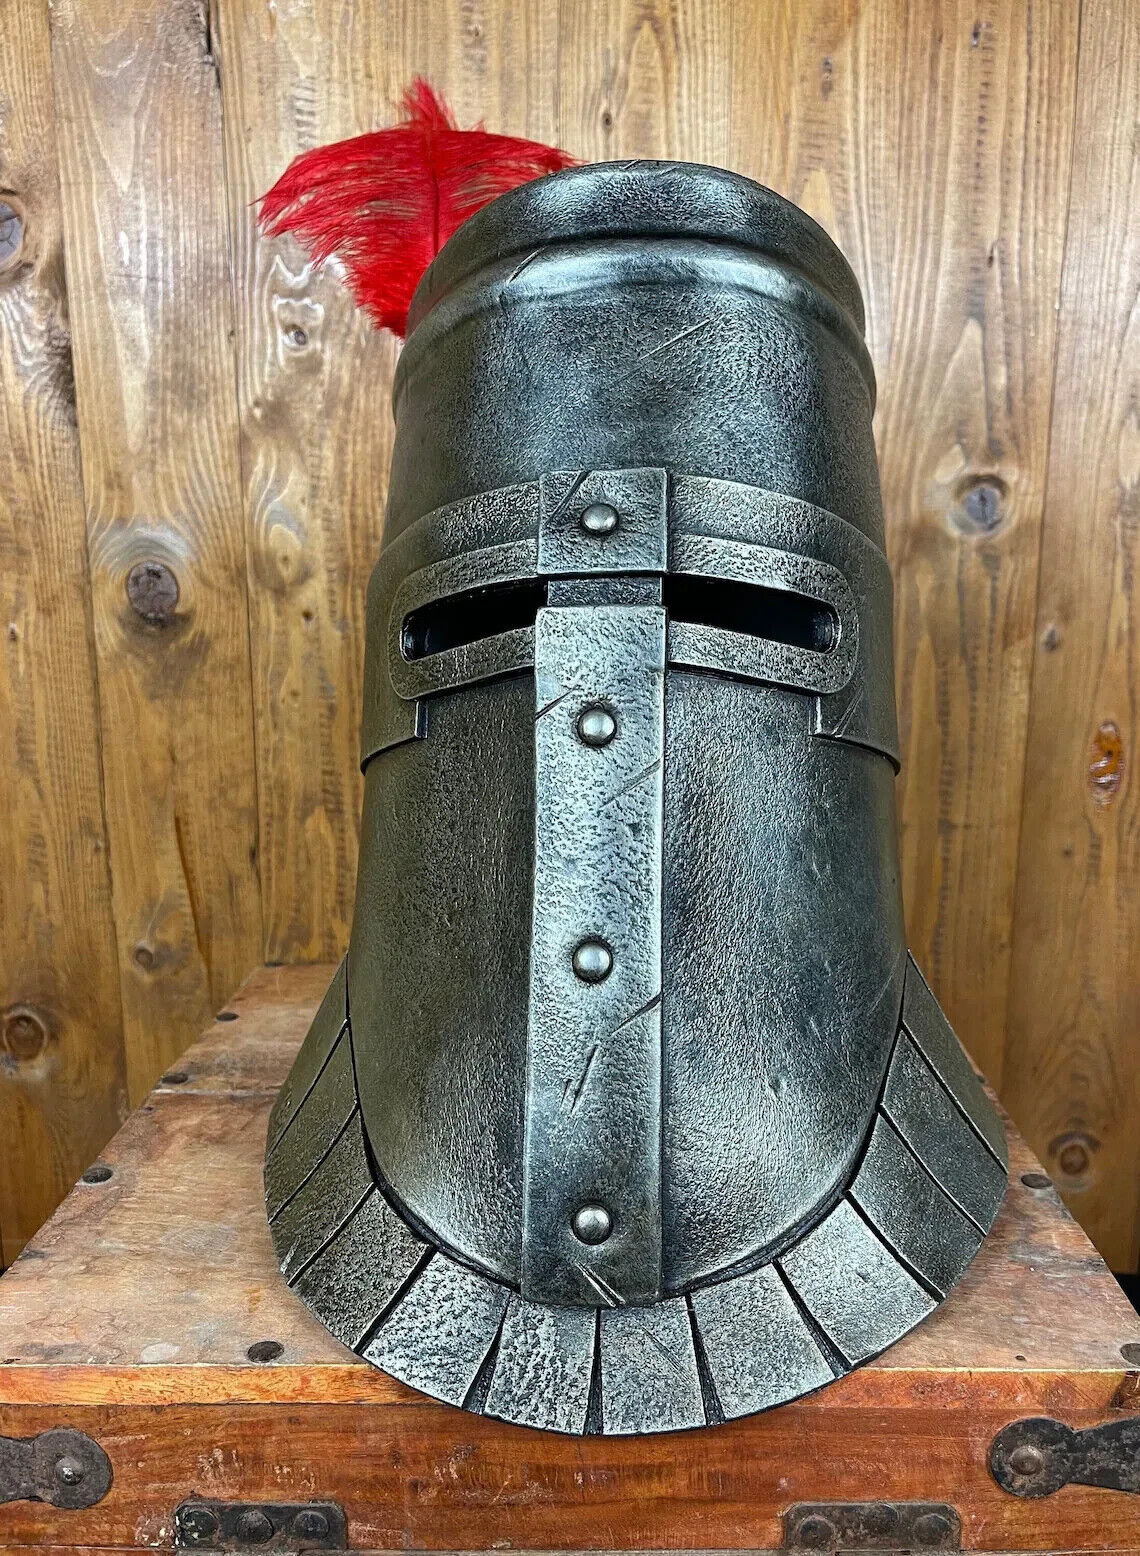 Dark Souls Leather Helmet Handcrafted Perfect for Larp Cosplay